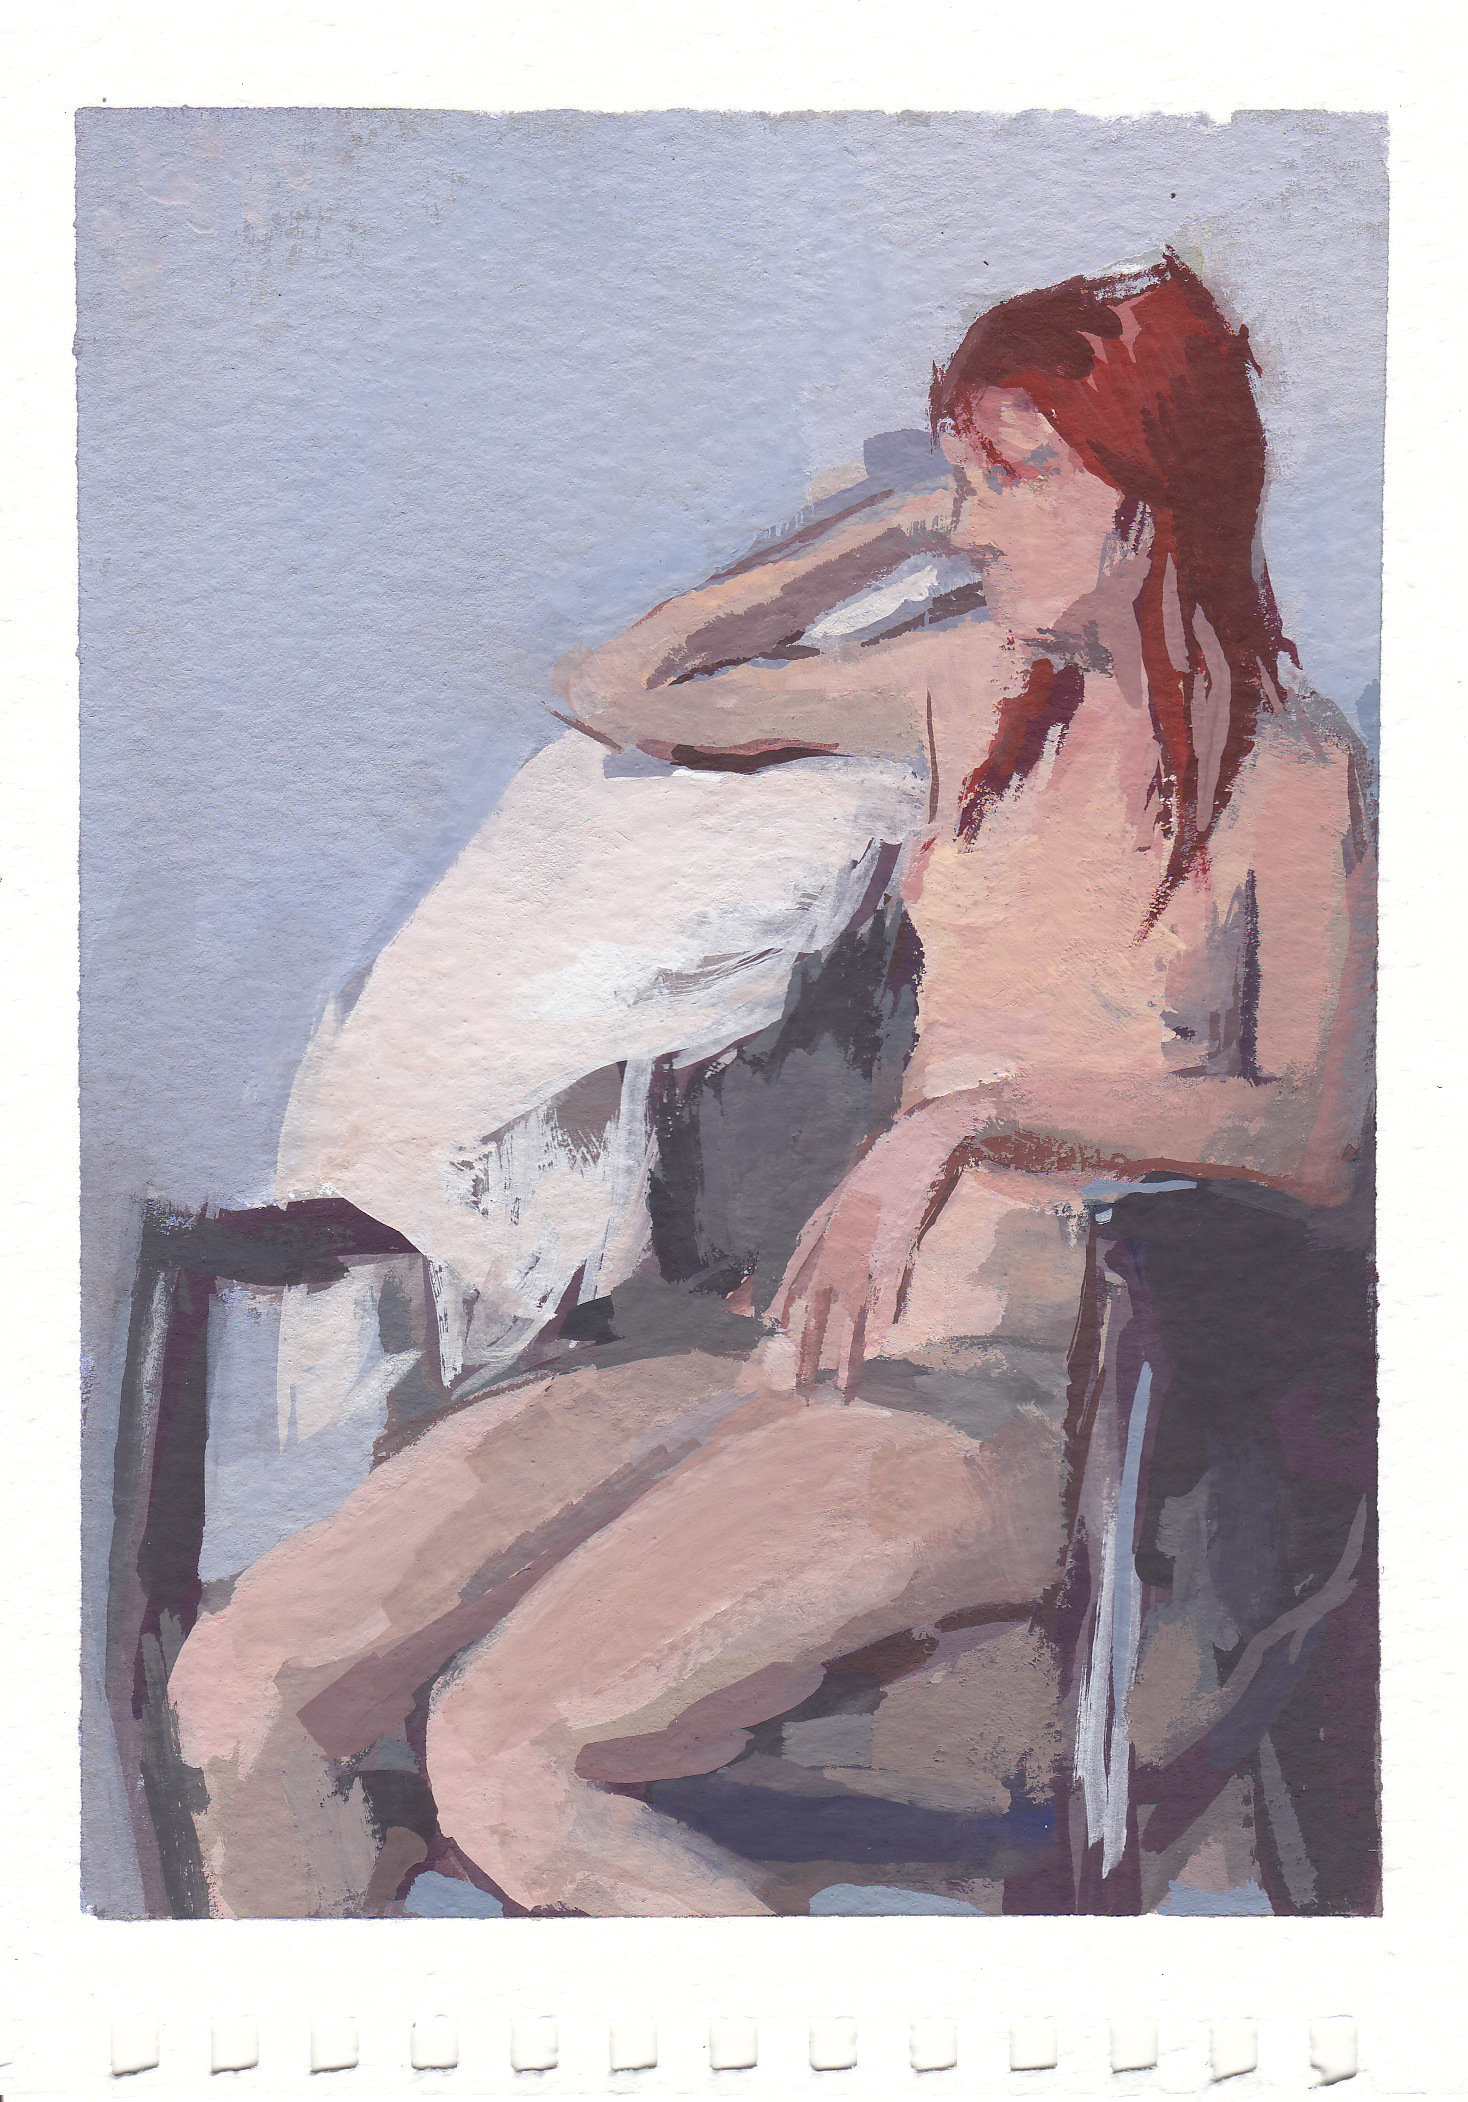    seated nude     gouache on paper 4.25x6" 2013  private collection Nashville, TN 